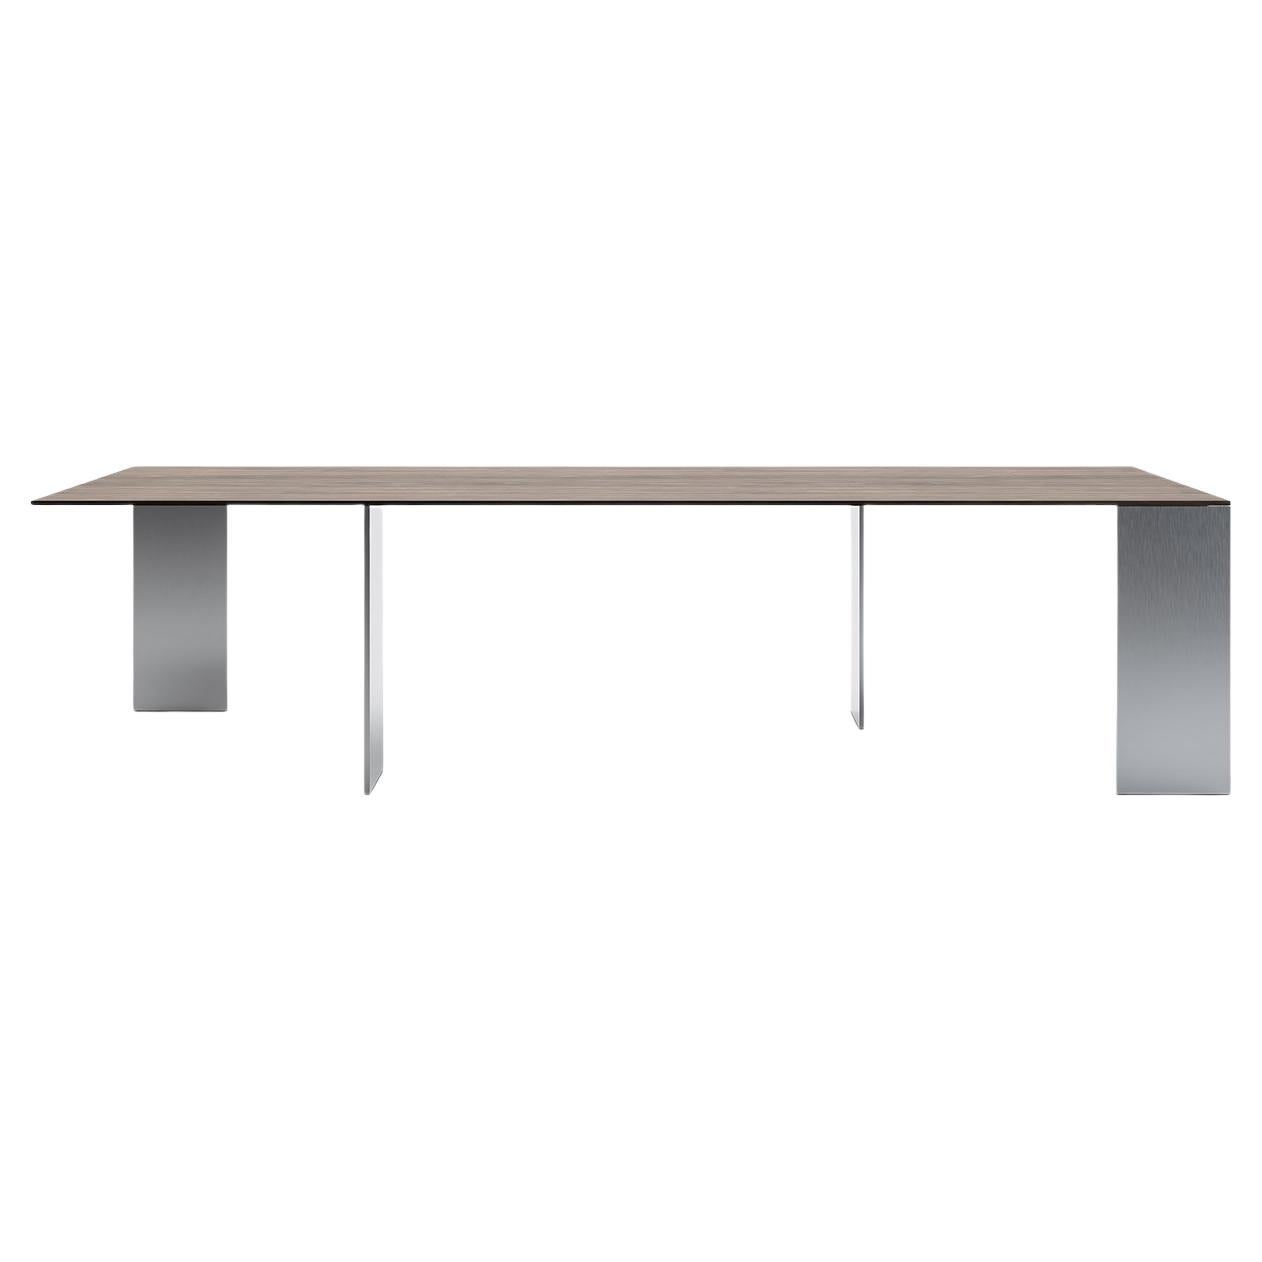 Acerbis Axis Small Table in Eucalyptus Wooden Top with Brushed Steel Frame